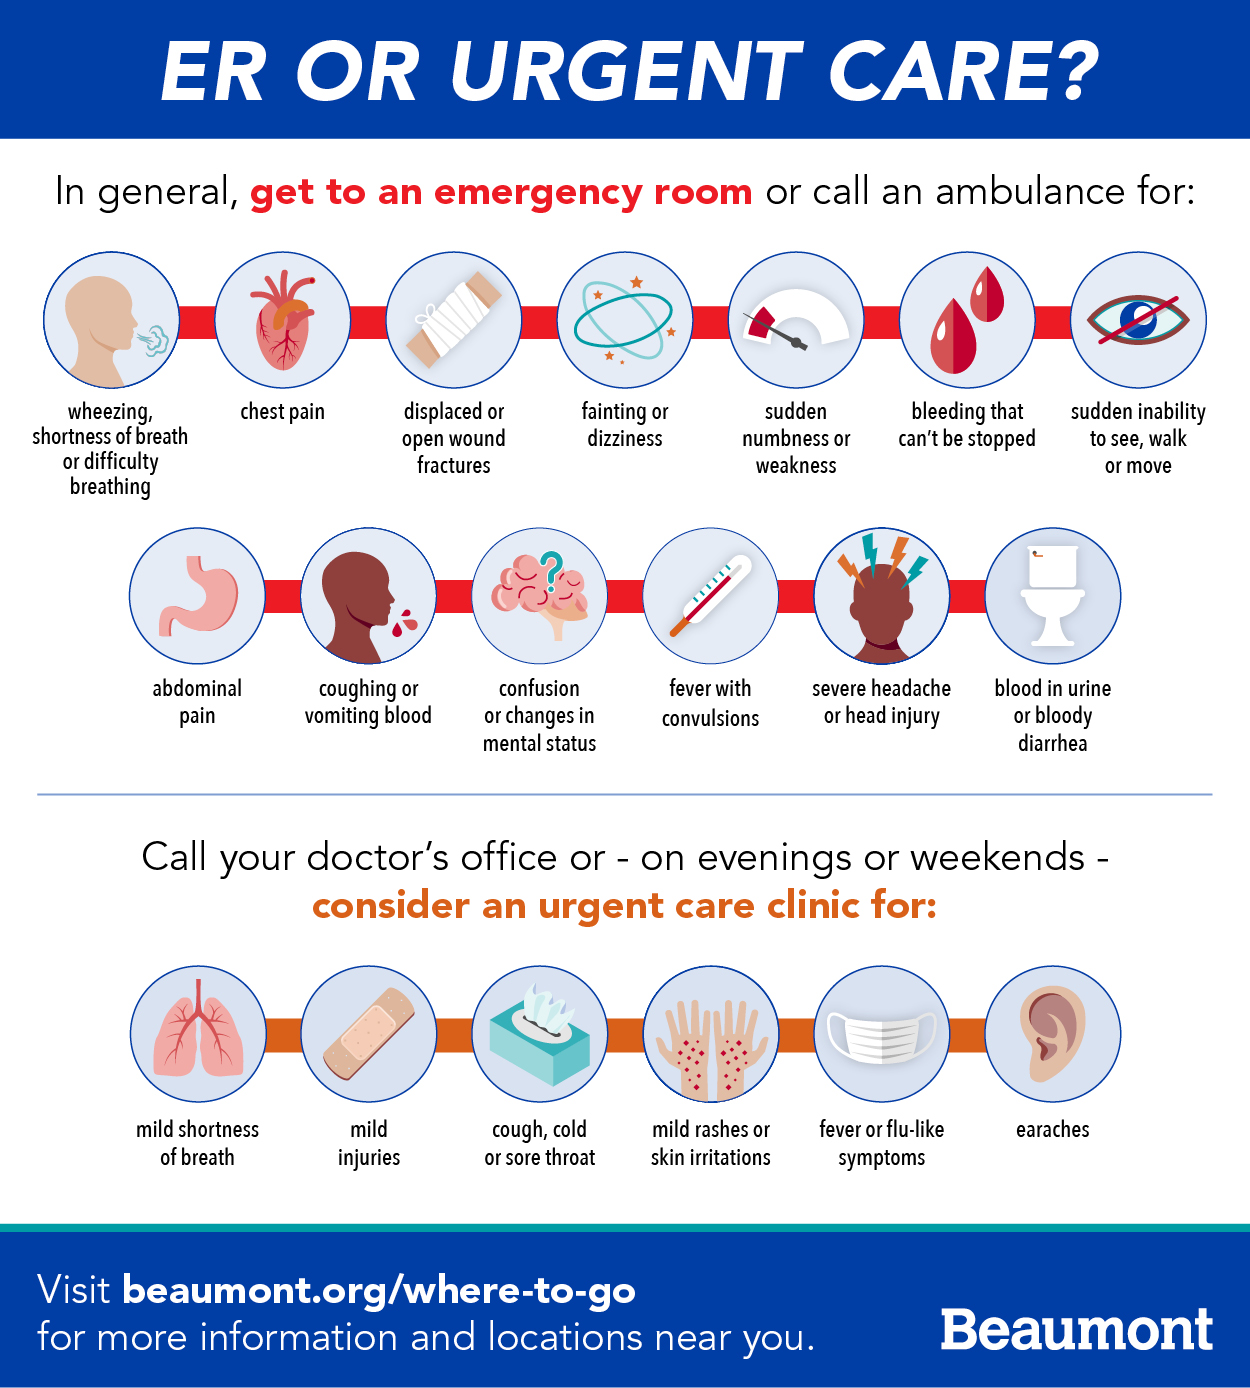 What is the best day and time to go to urgent care?